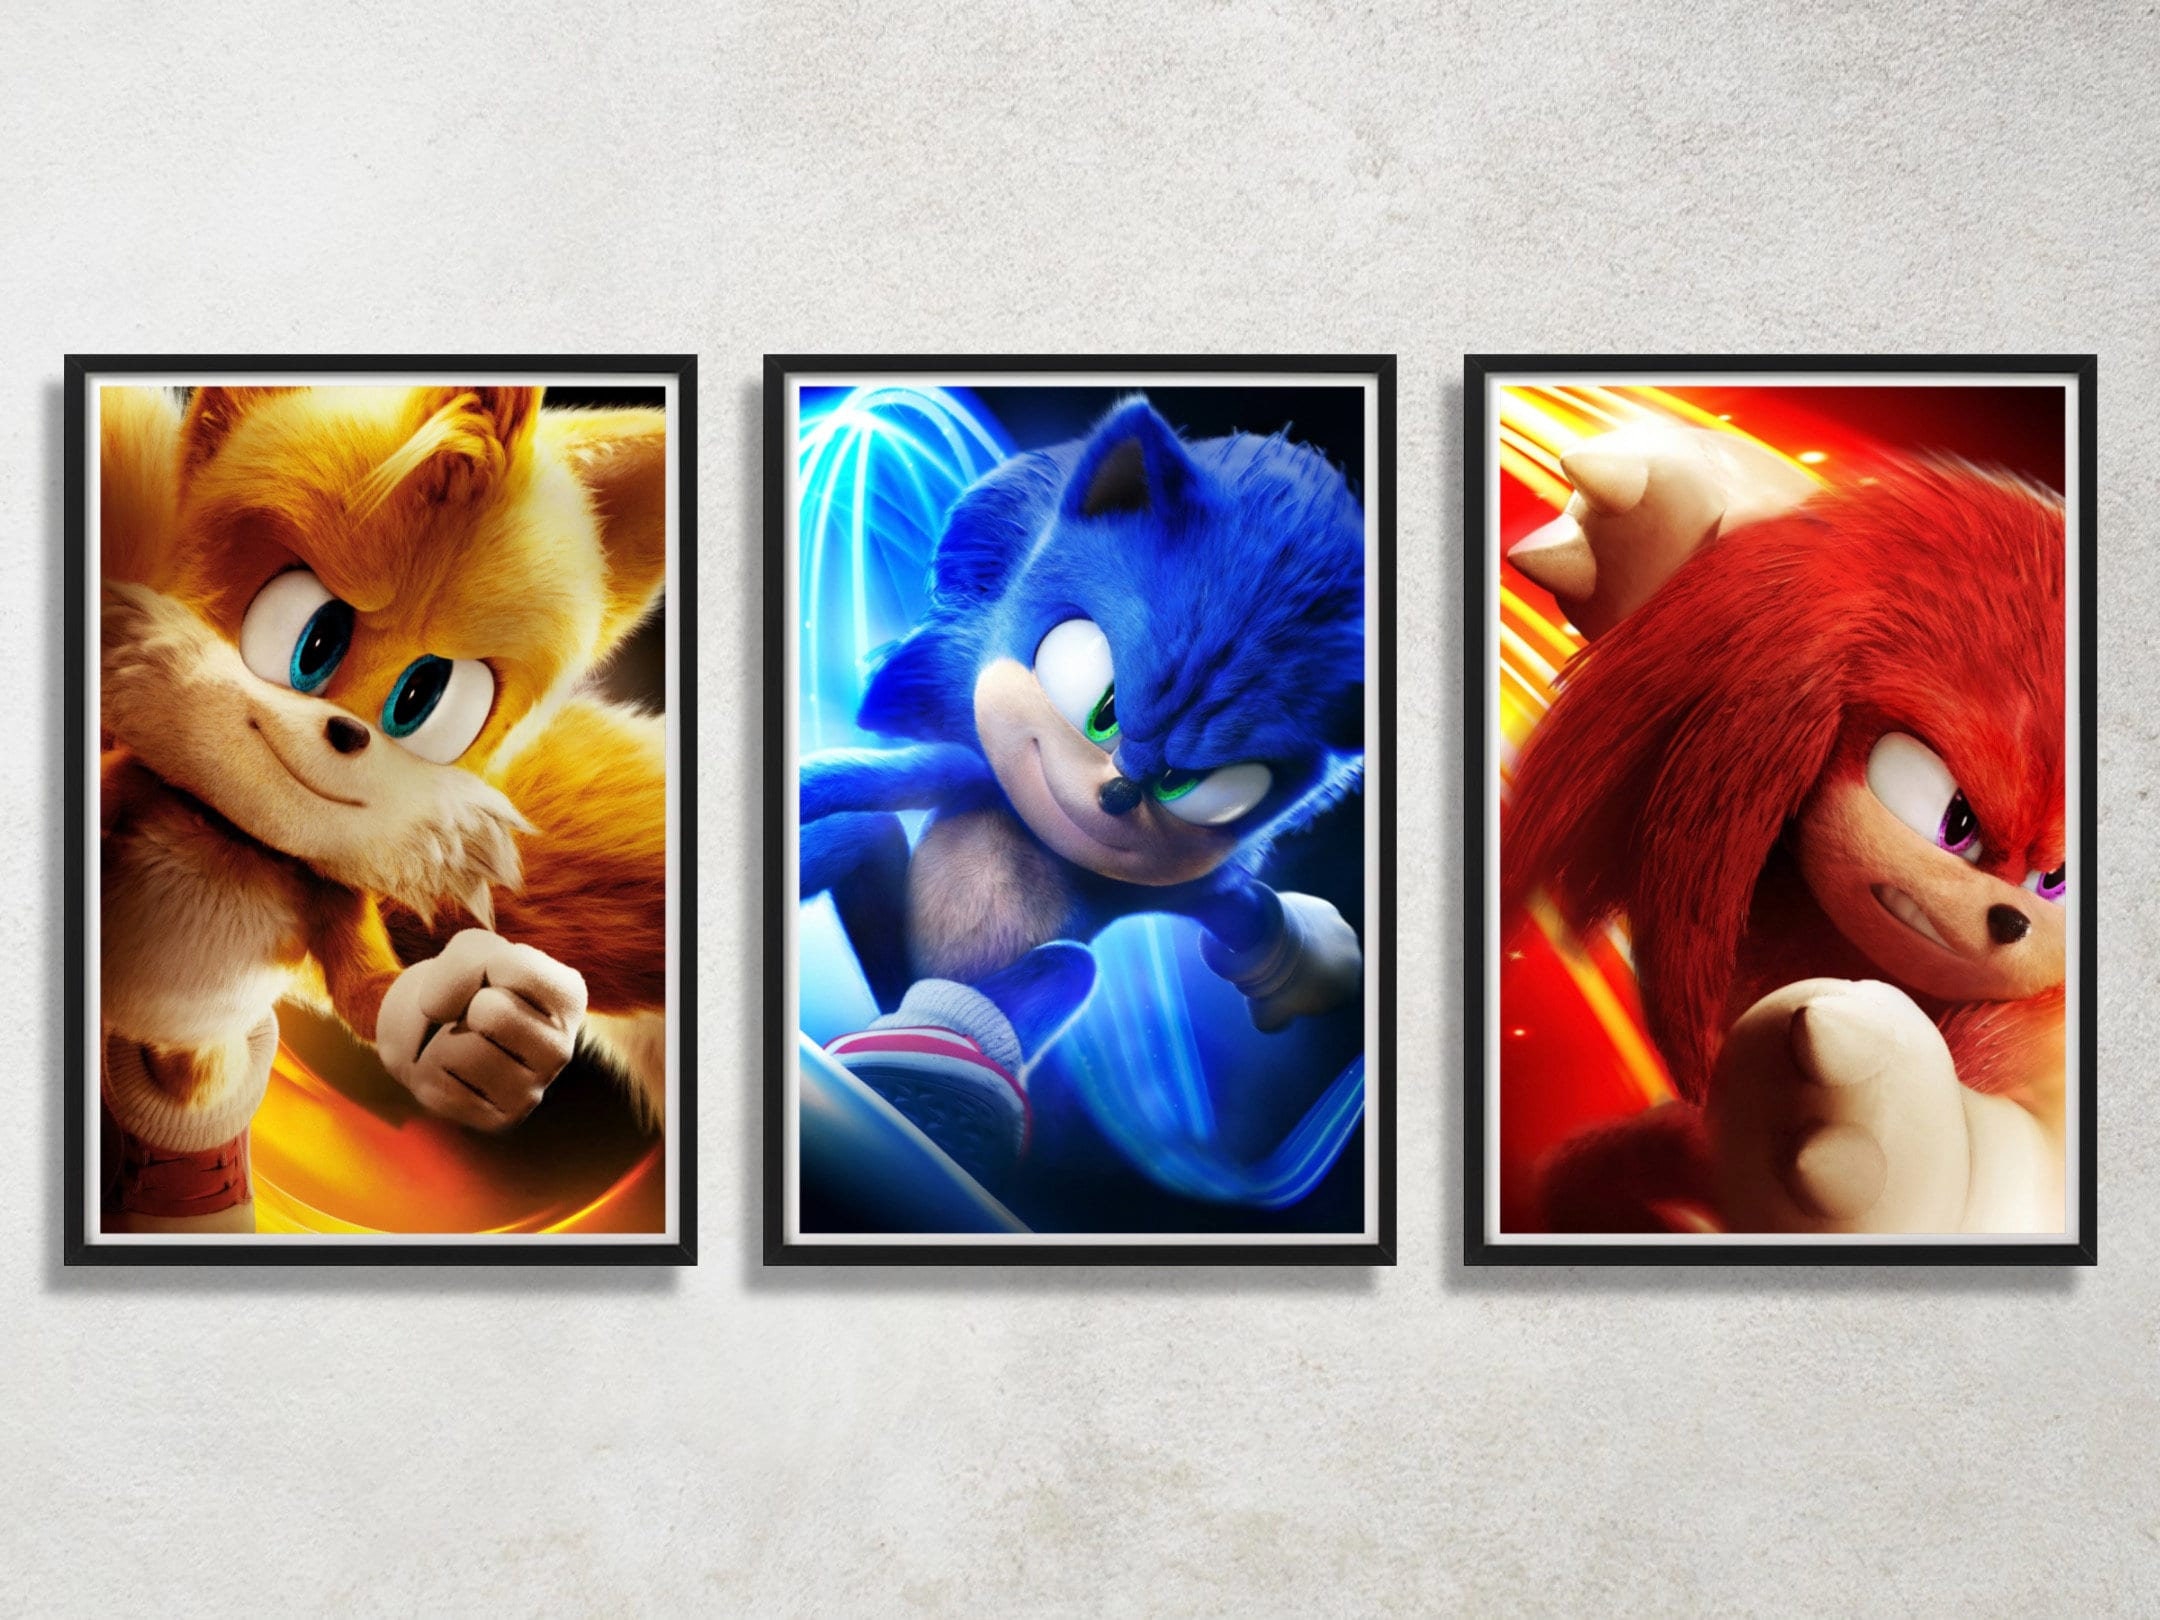 Sonic The Hedgehog 2 Character Posters Spotlight Sonic, Tails, Knuckles